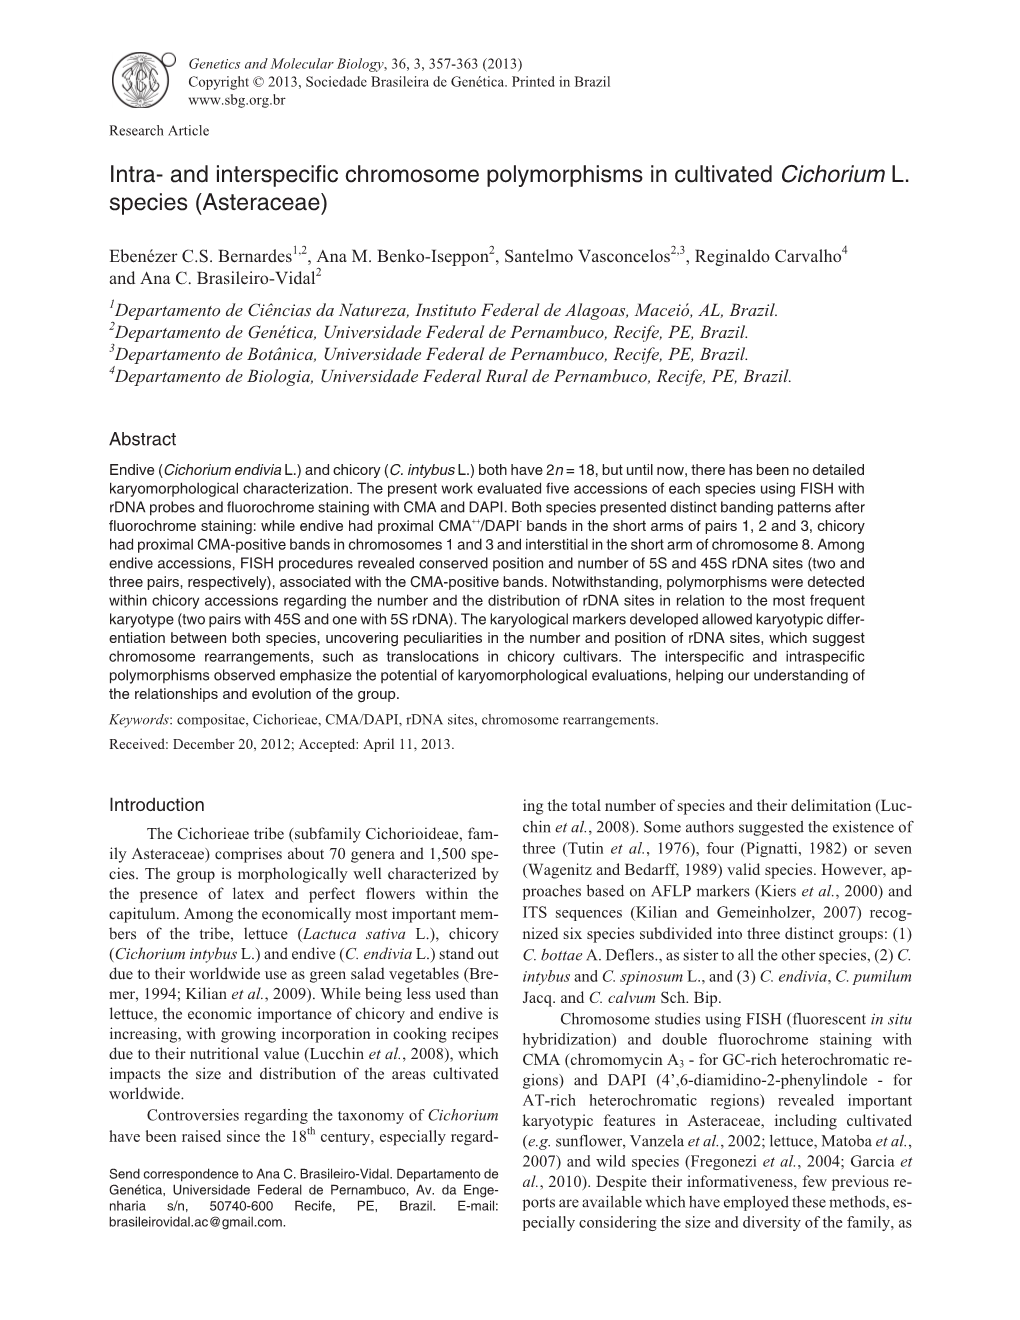 Intra- and Interspecific Chromosome Polymorphisms in Cultivated Cichorium L. Species (Asteraceae)